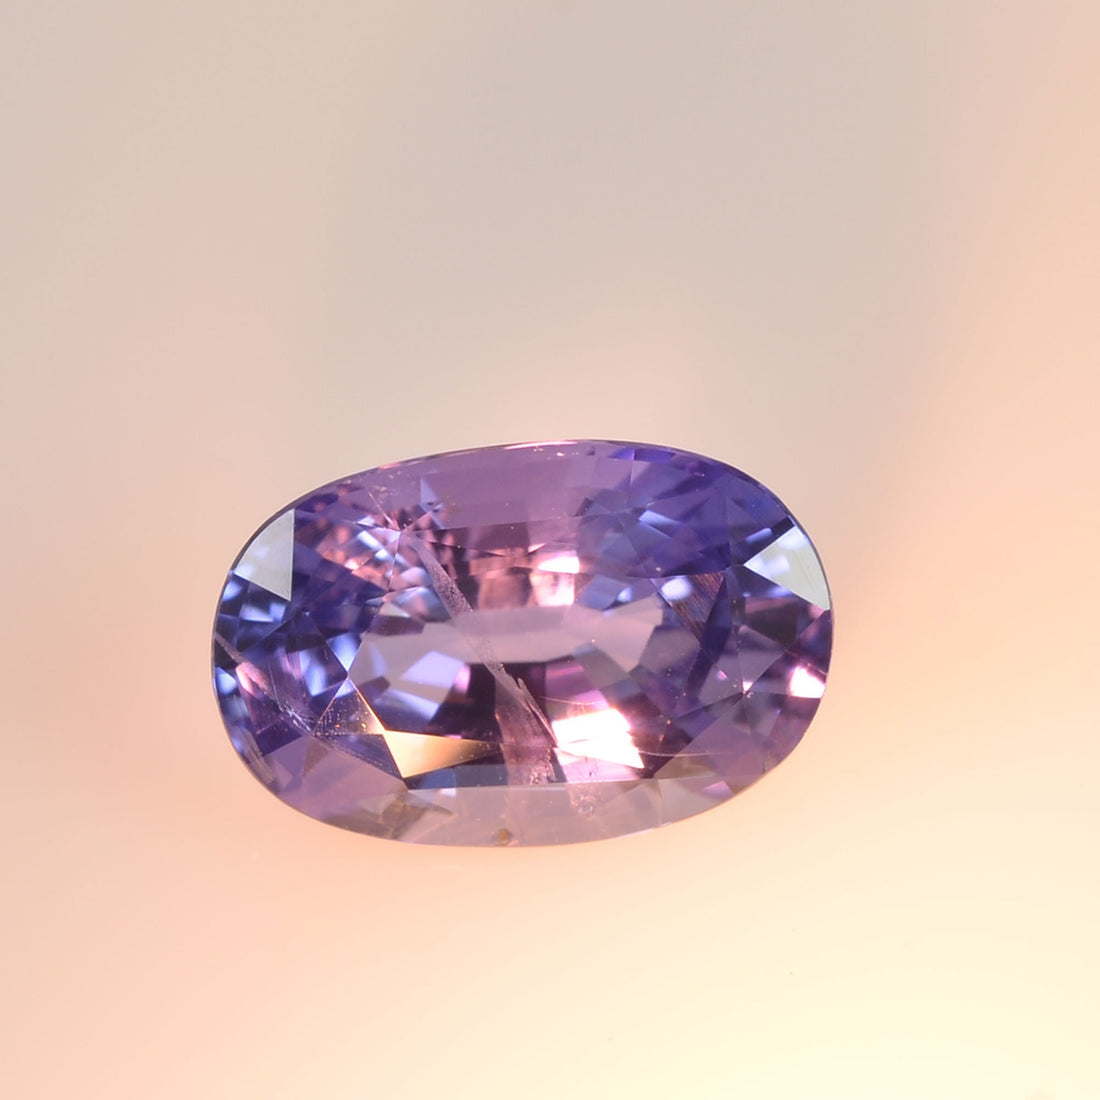 1.94 cts Unheated Natural Color Change Blue Sapphire Loose Gemstone Oval Cut Certified